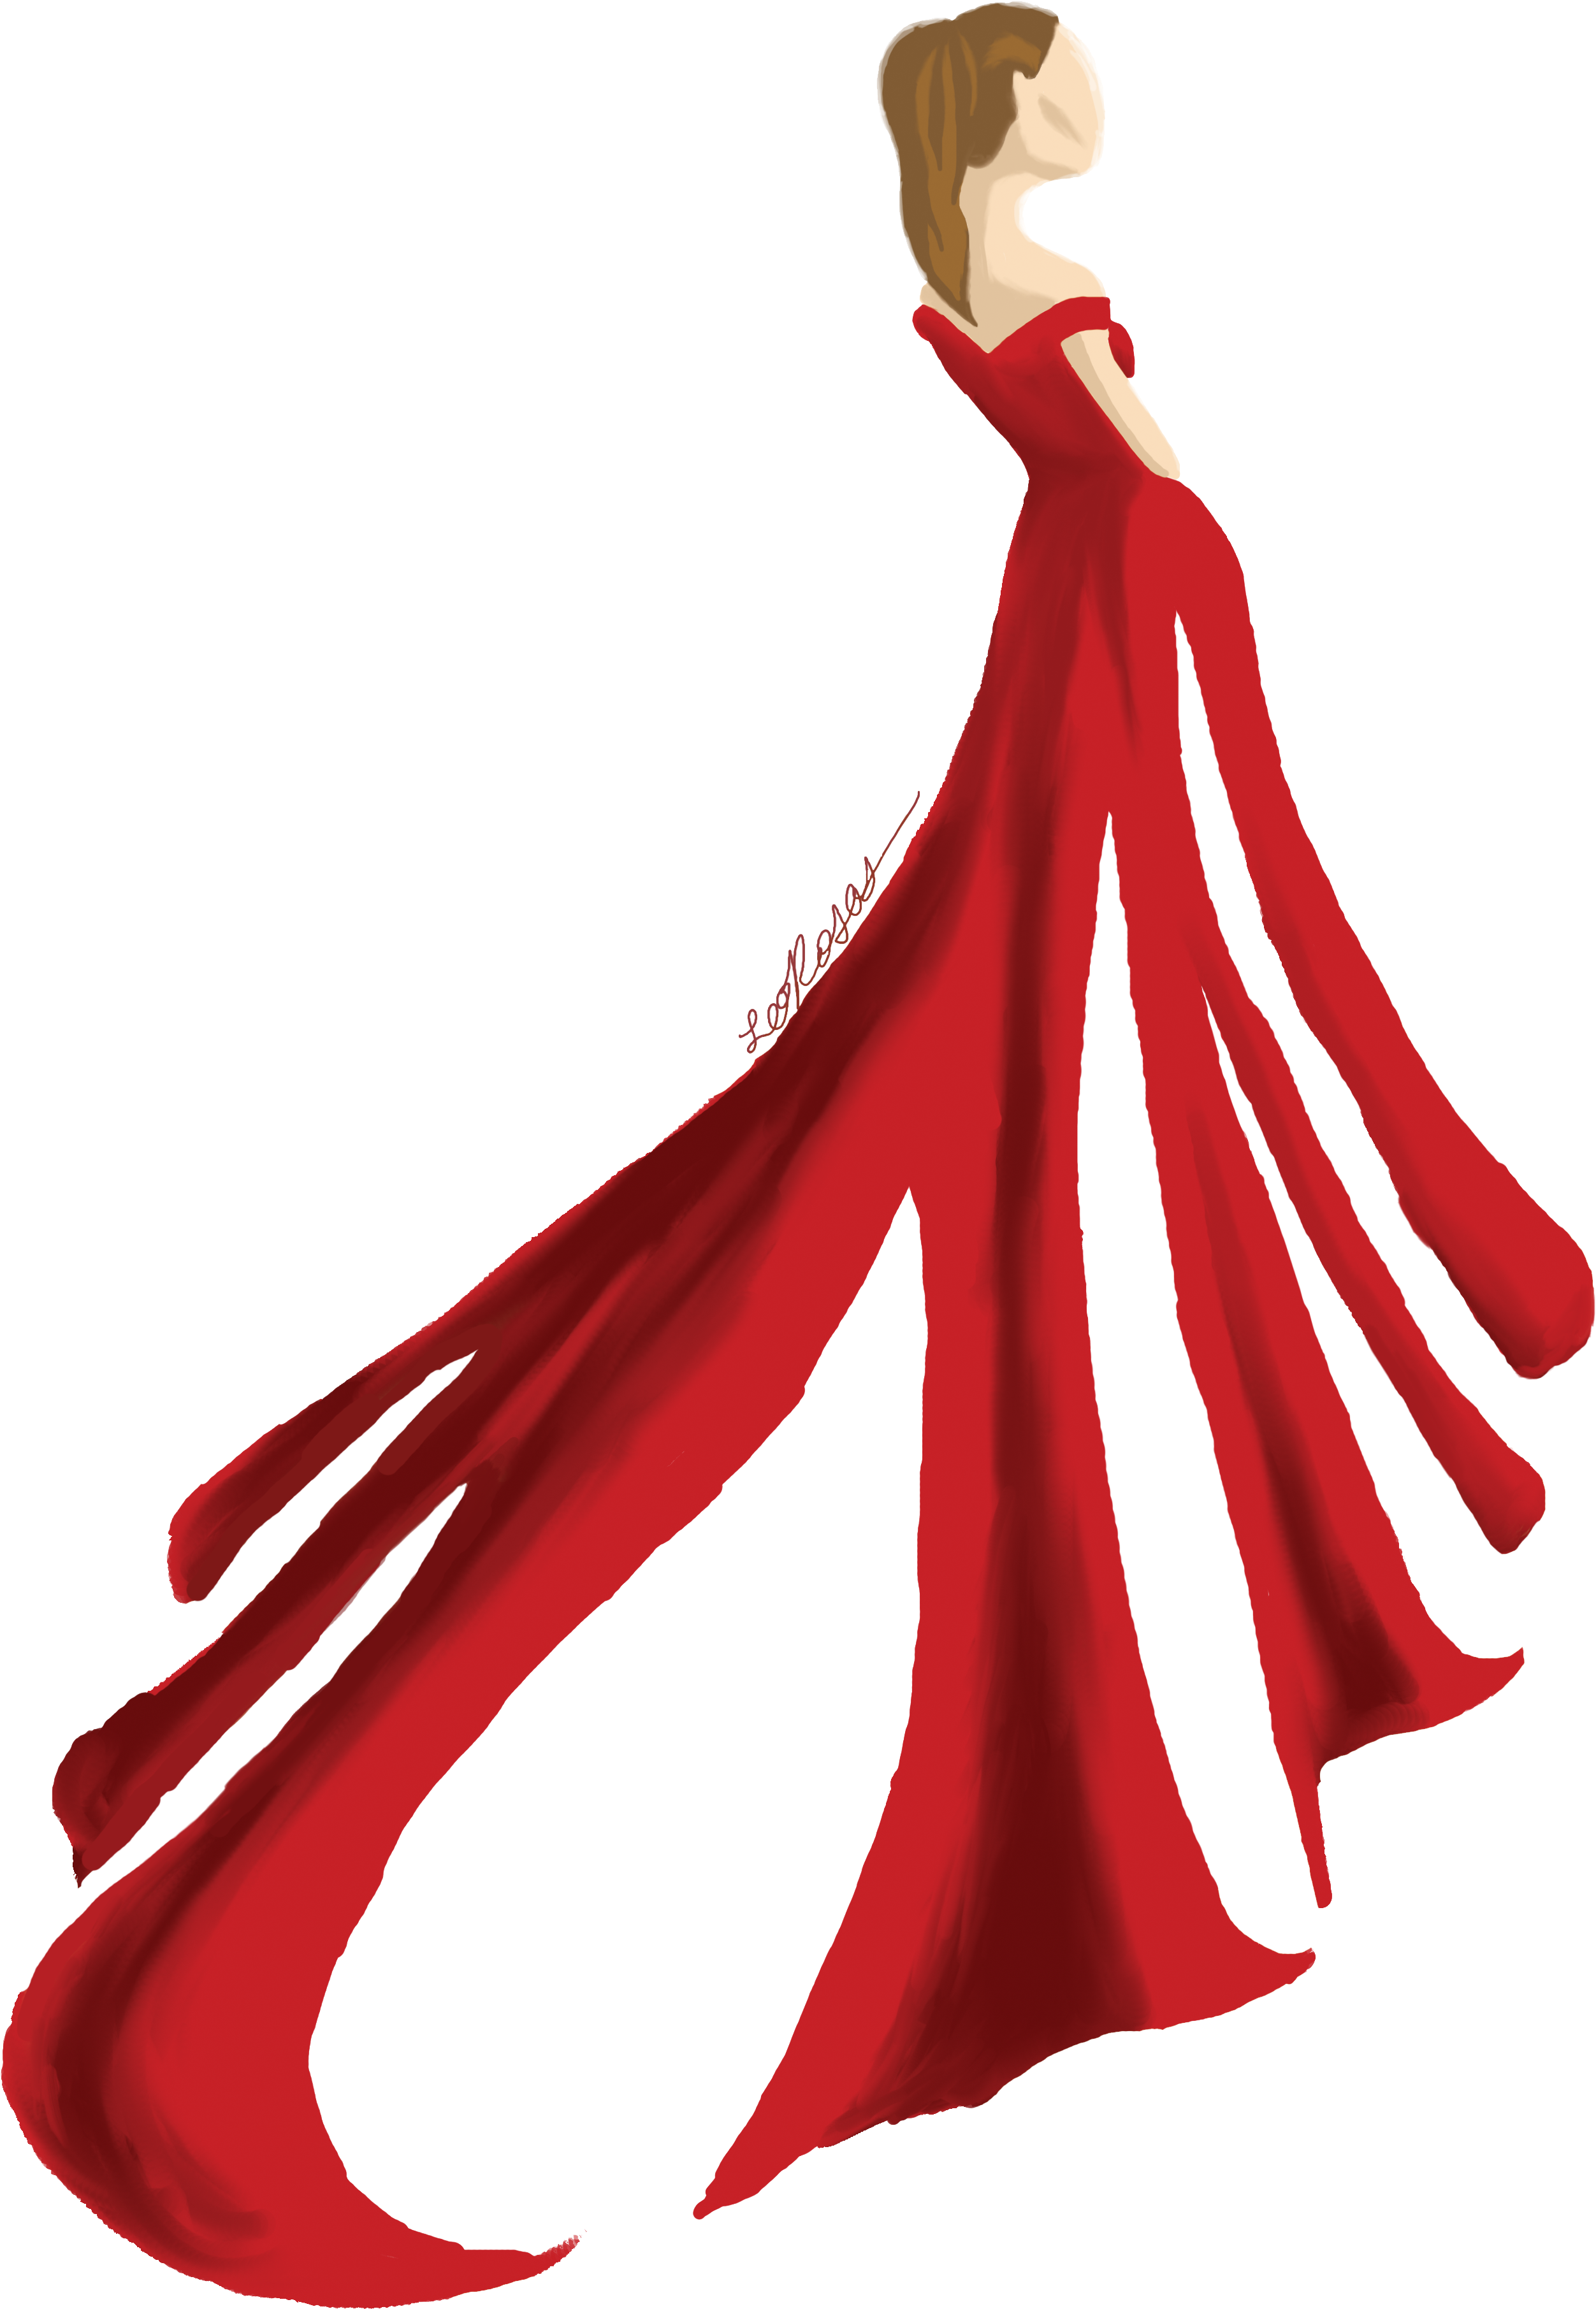 Alpha Phi's Red Dress Gala - Illustration - (2865x4127) Png Clipart...